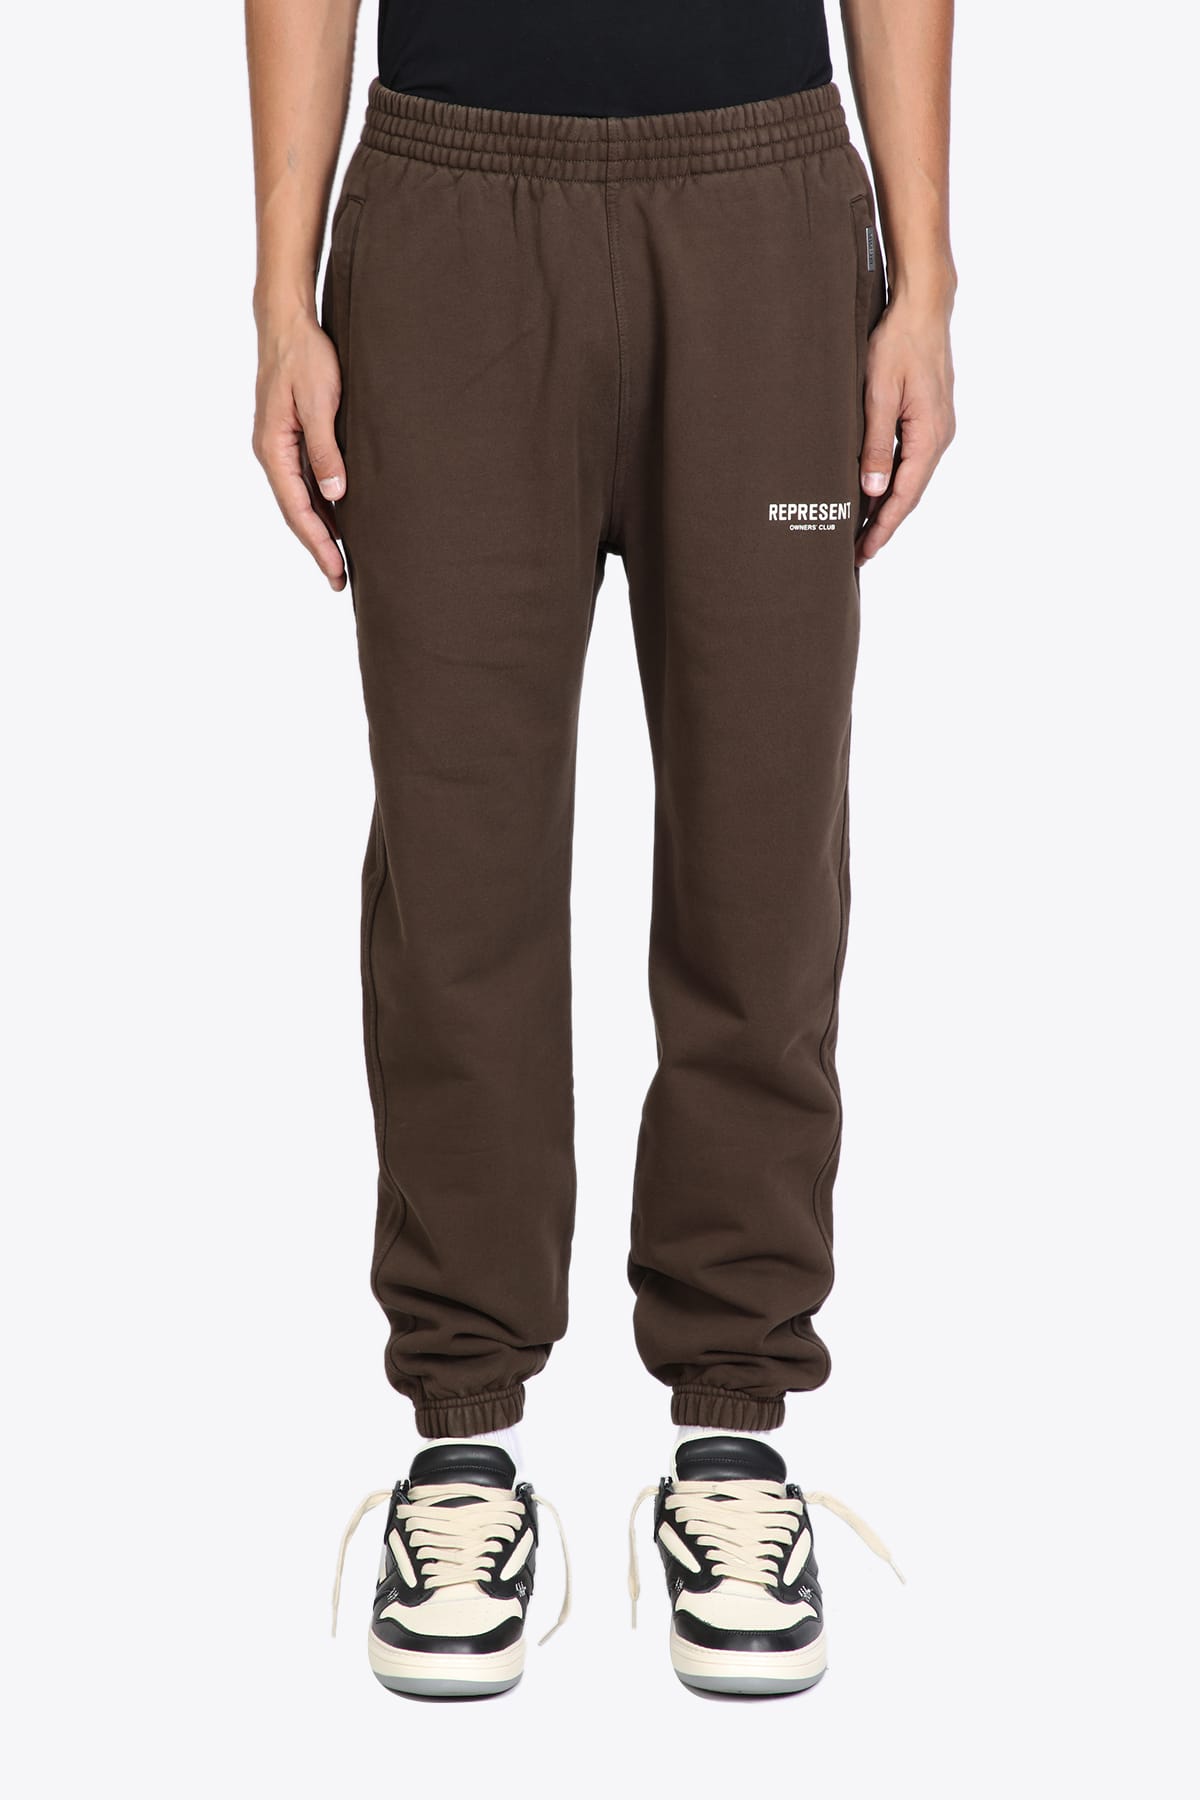 Represent Owners Club Relaxed Sweatpant Brown cotton sweatpant - Owners club relaxed sweatpant